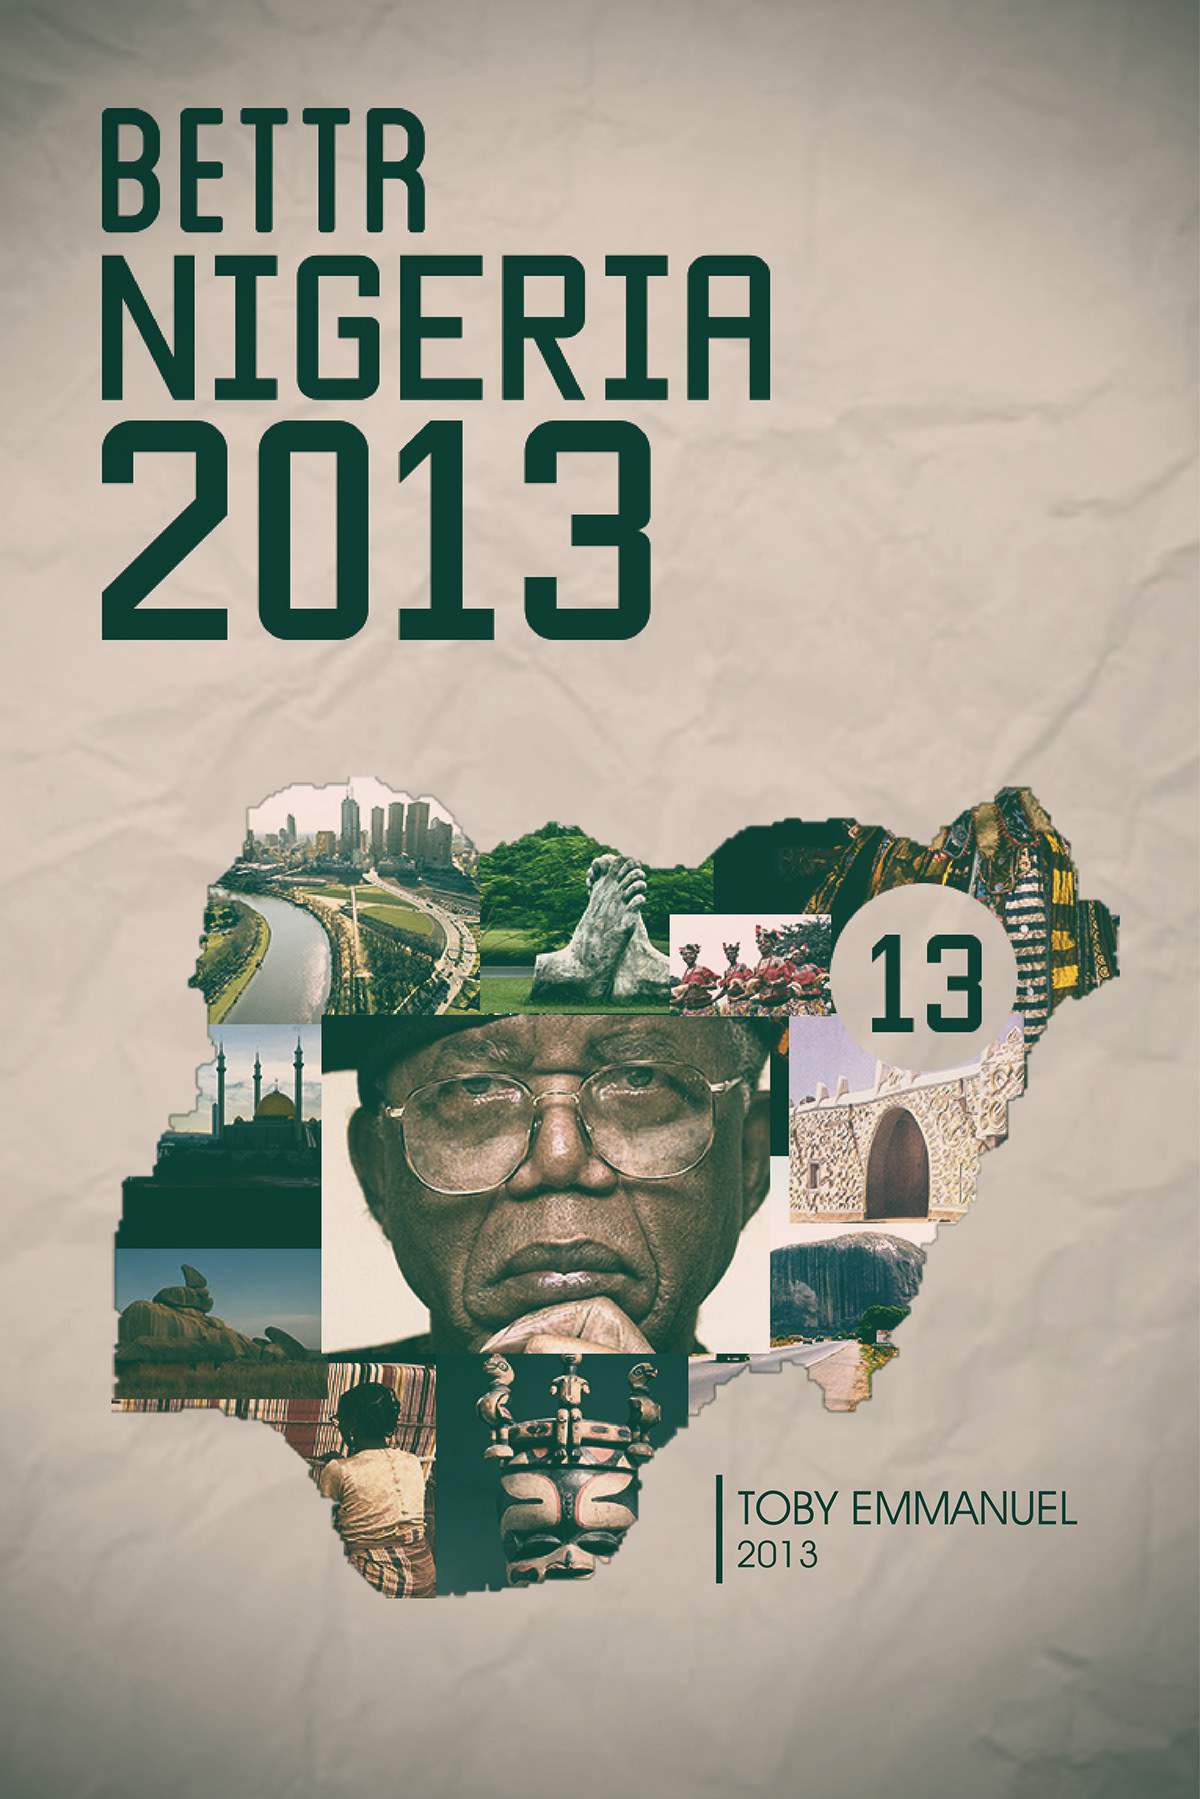 nigeria 2013nigeria nigeria2013 better better nigeria culture better2013 great nigeria peace and unity peace unity Legacy